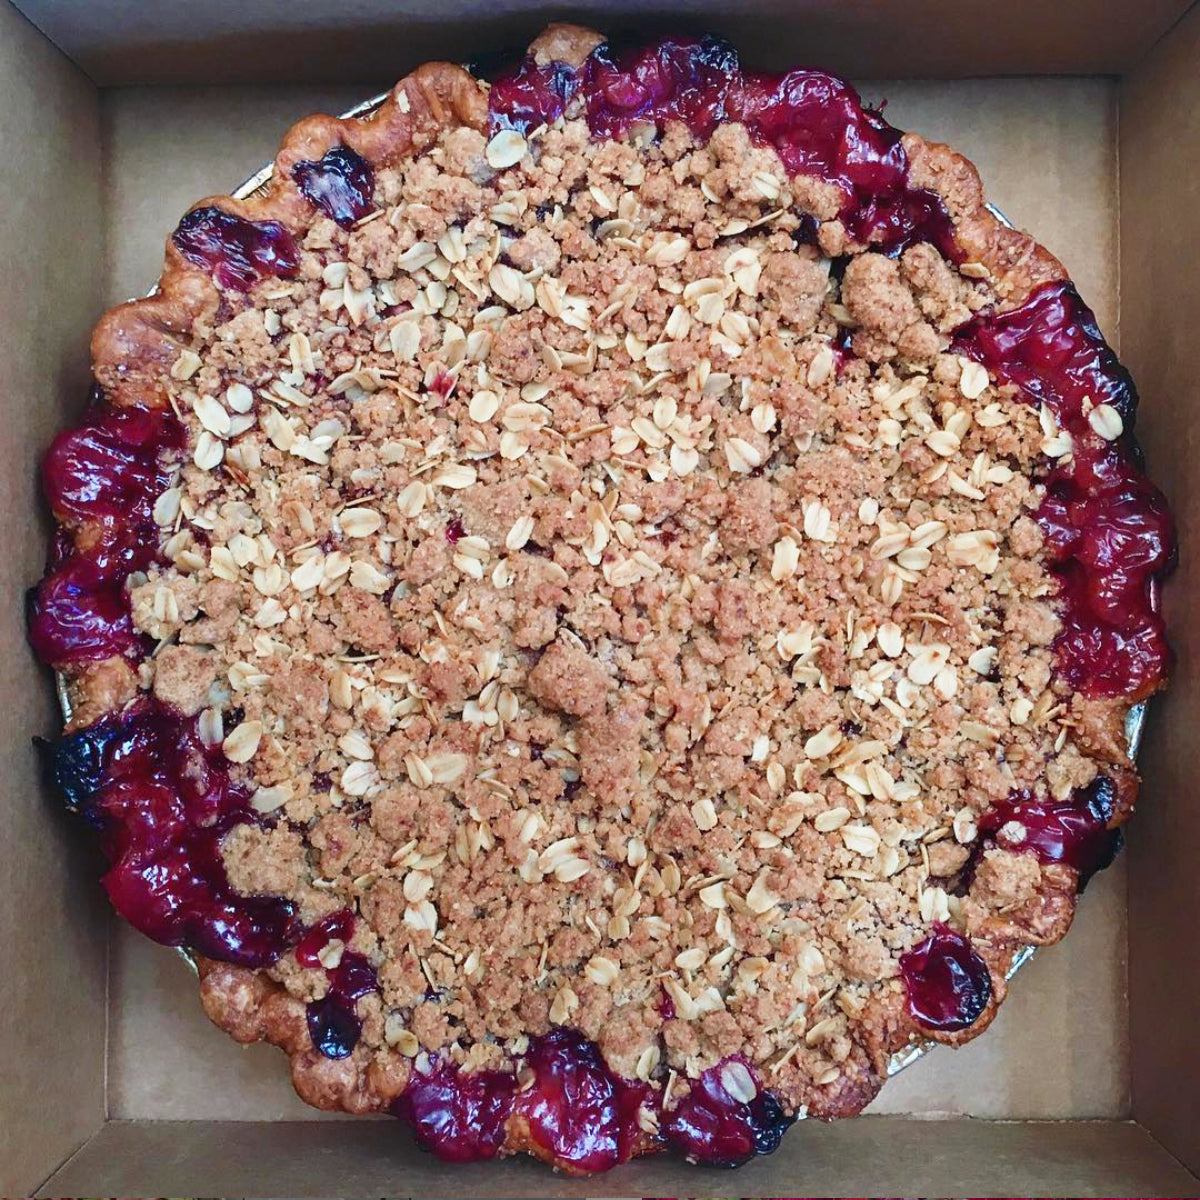 6" Gluten-Free Strawberry Rhubarb Crumble (Pre-Order Only)